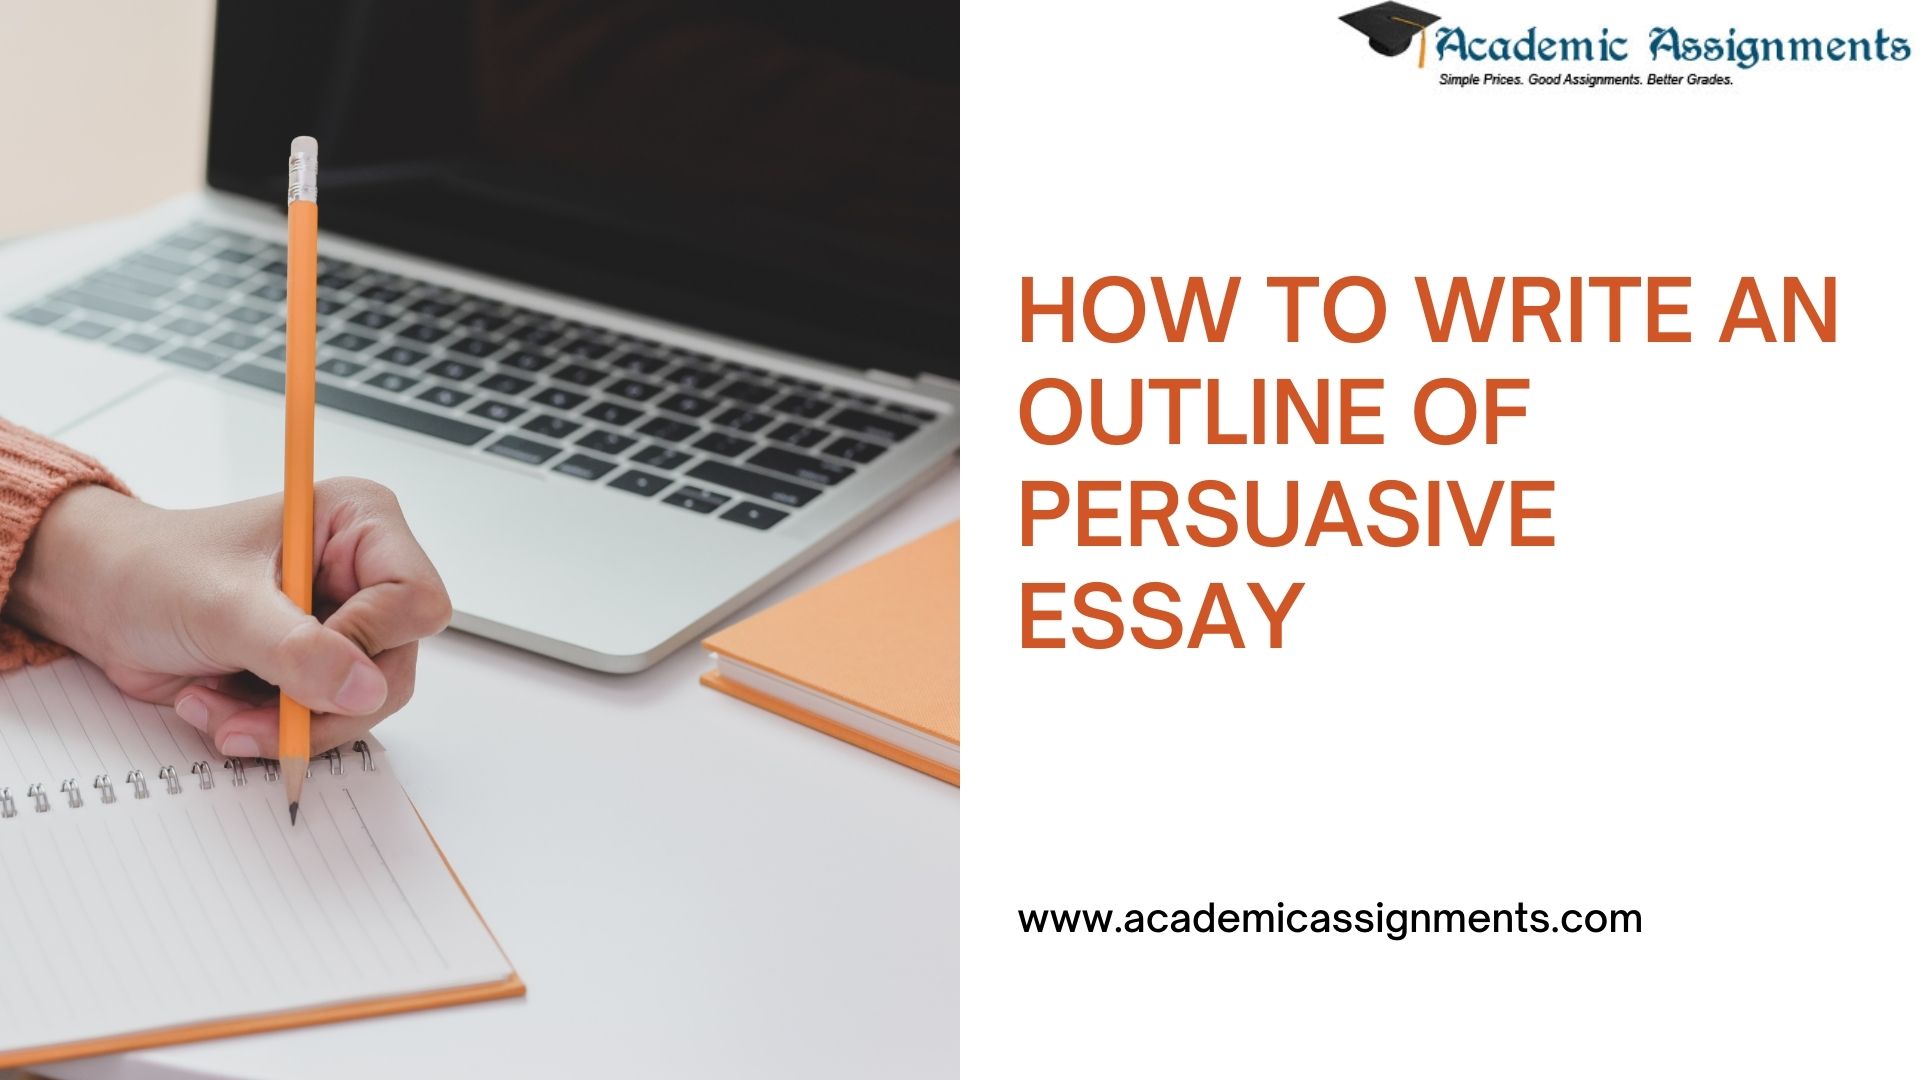 HOW TO WRITE AN OUTLINE OF PERSUASIVE ESSAY